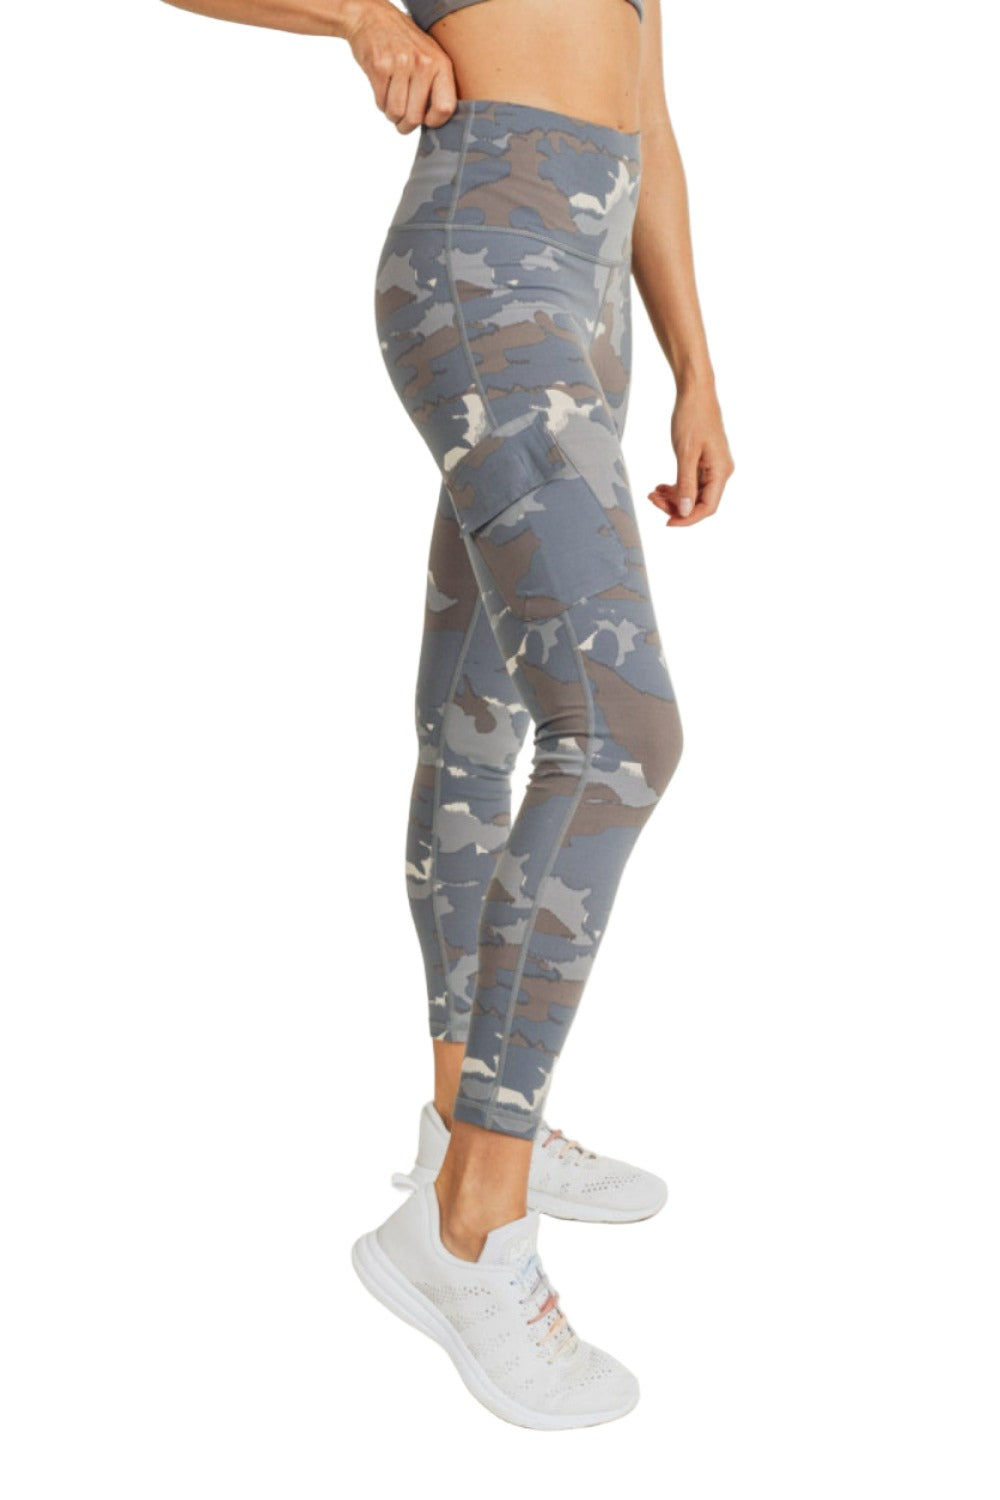 JupiterGear JG-A2075-LEG-CM3-LXL High-Waisted Tactical Outdoor Leggings  with Side Cargo Pockets Blue Camo Large X-Large 